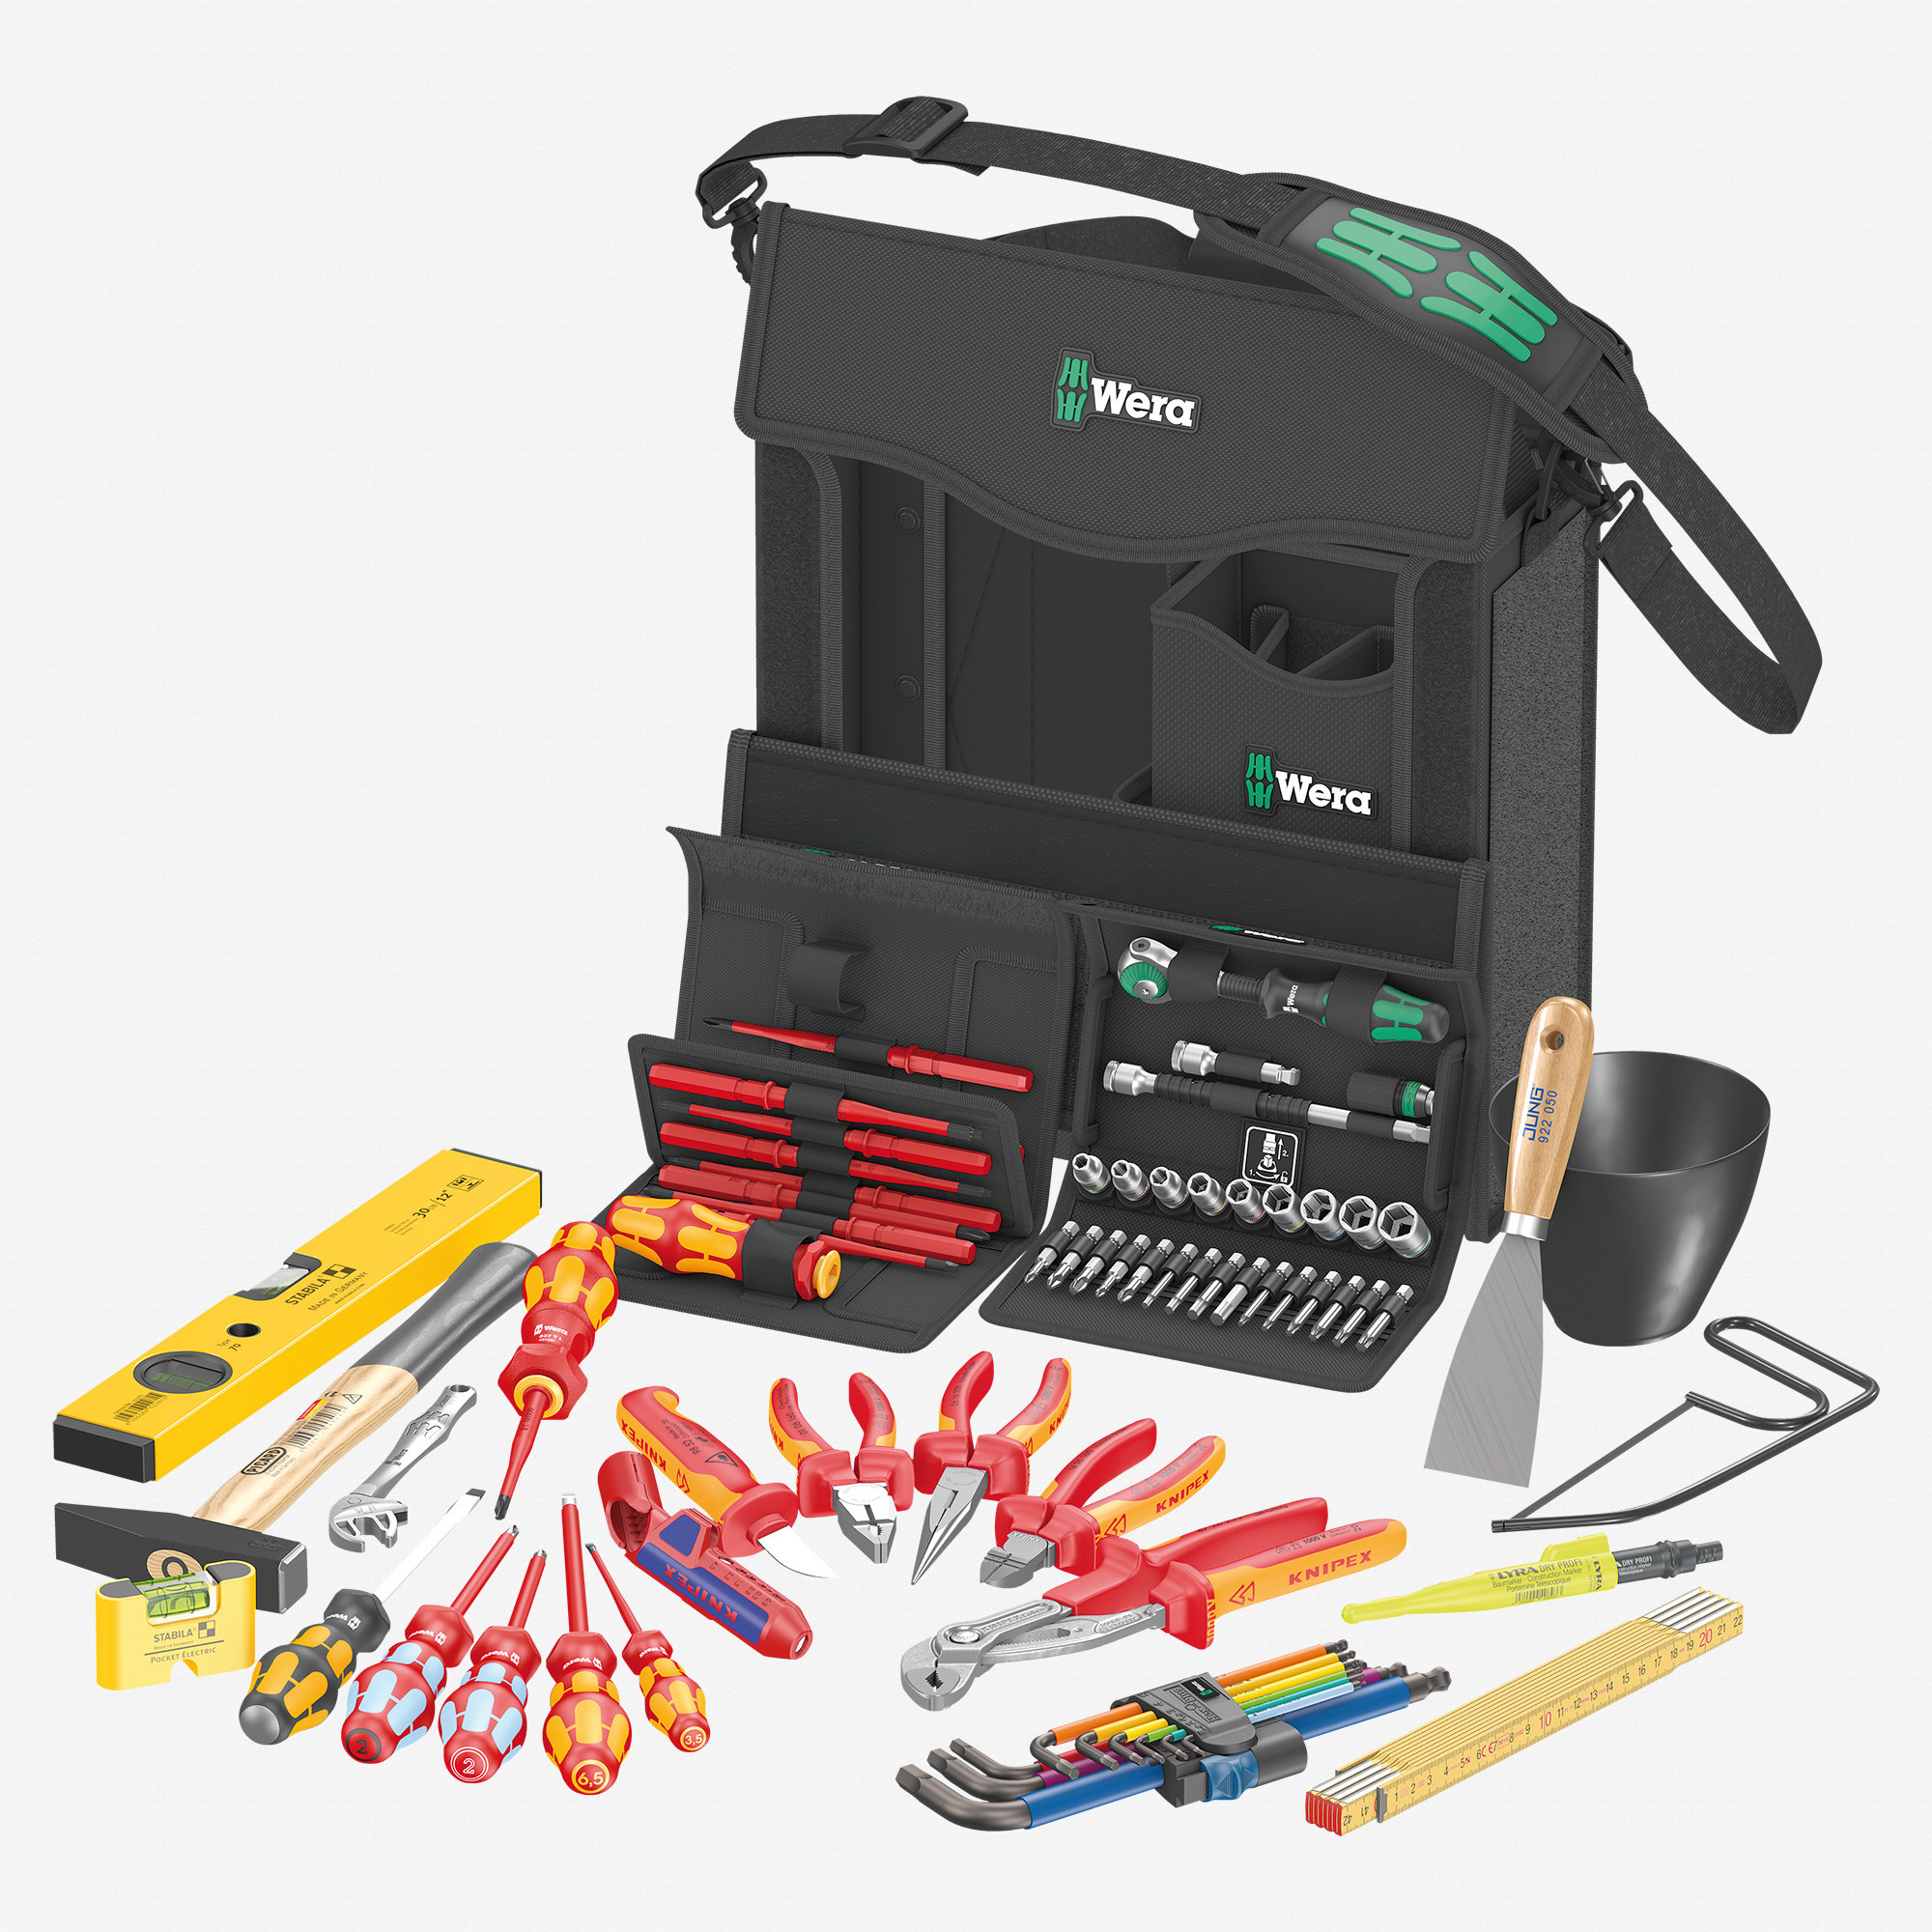 Wera 2go H1 (Tool Set for Wood Application)